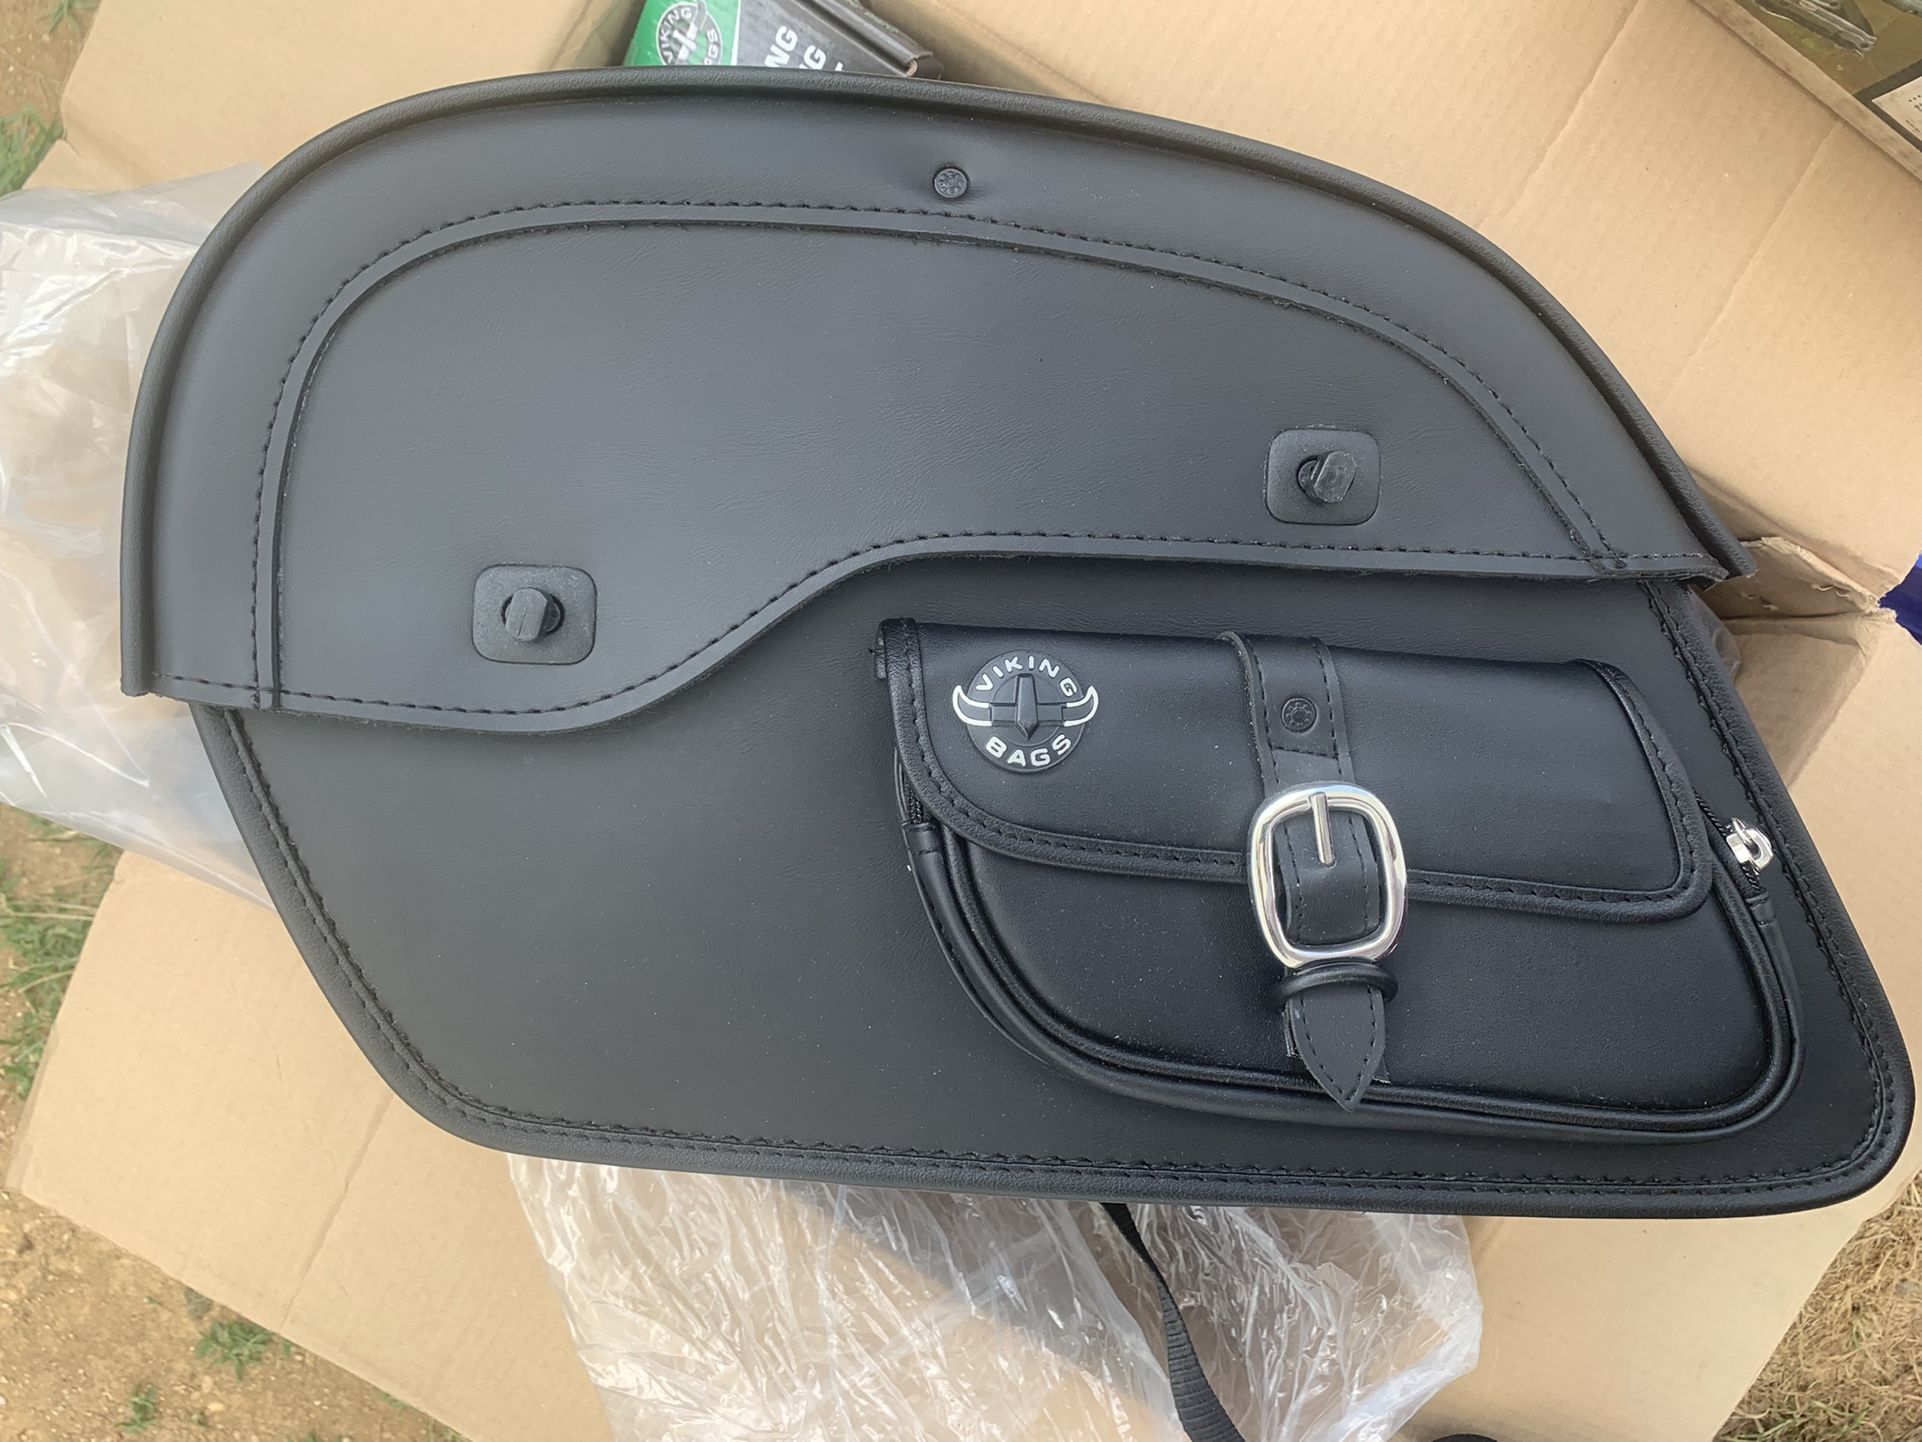 Side Saddle Bags (2) For Motorcycle  Universal Purchased For A Honda VTX 1300